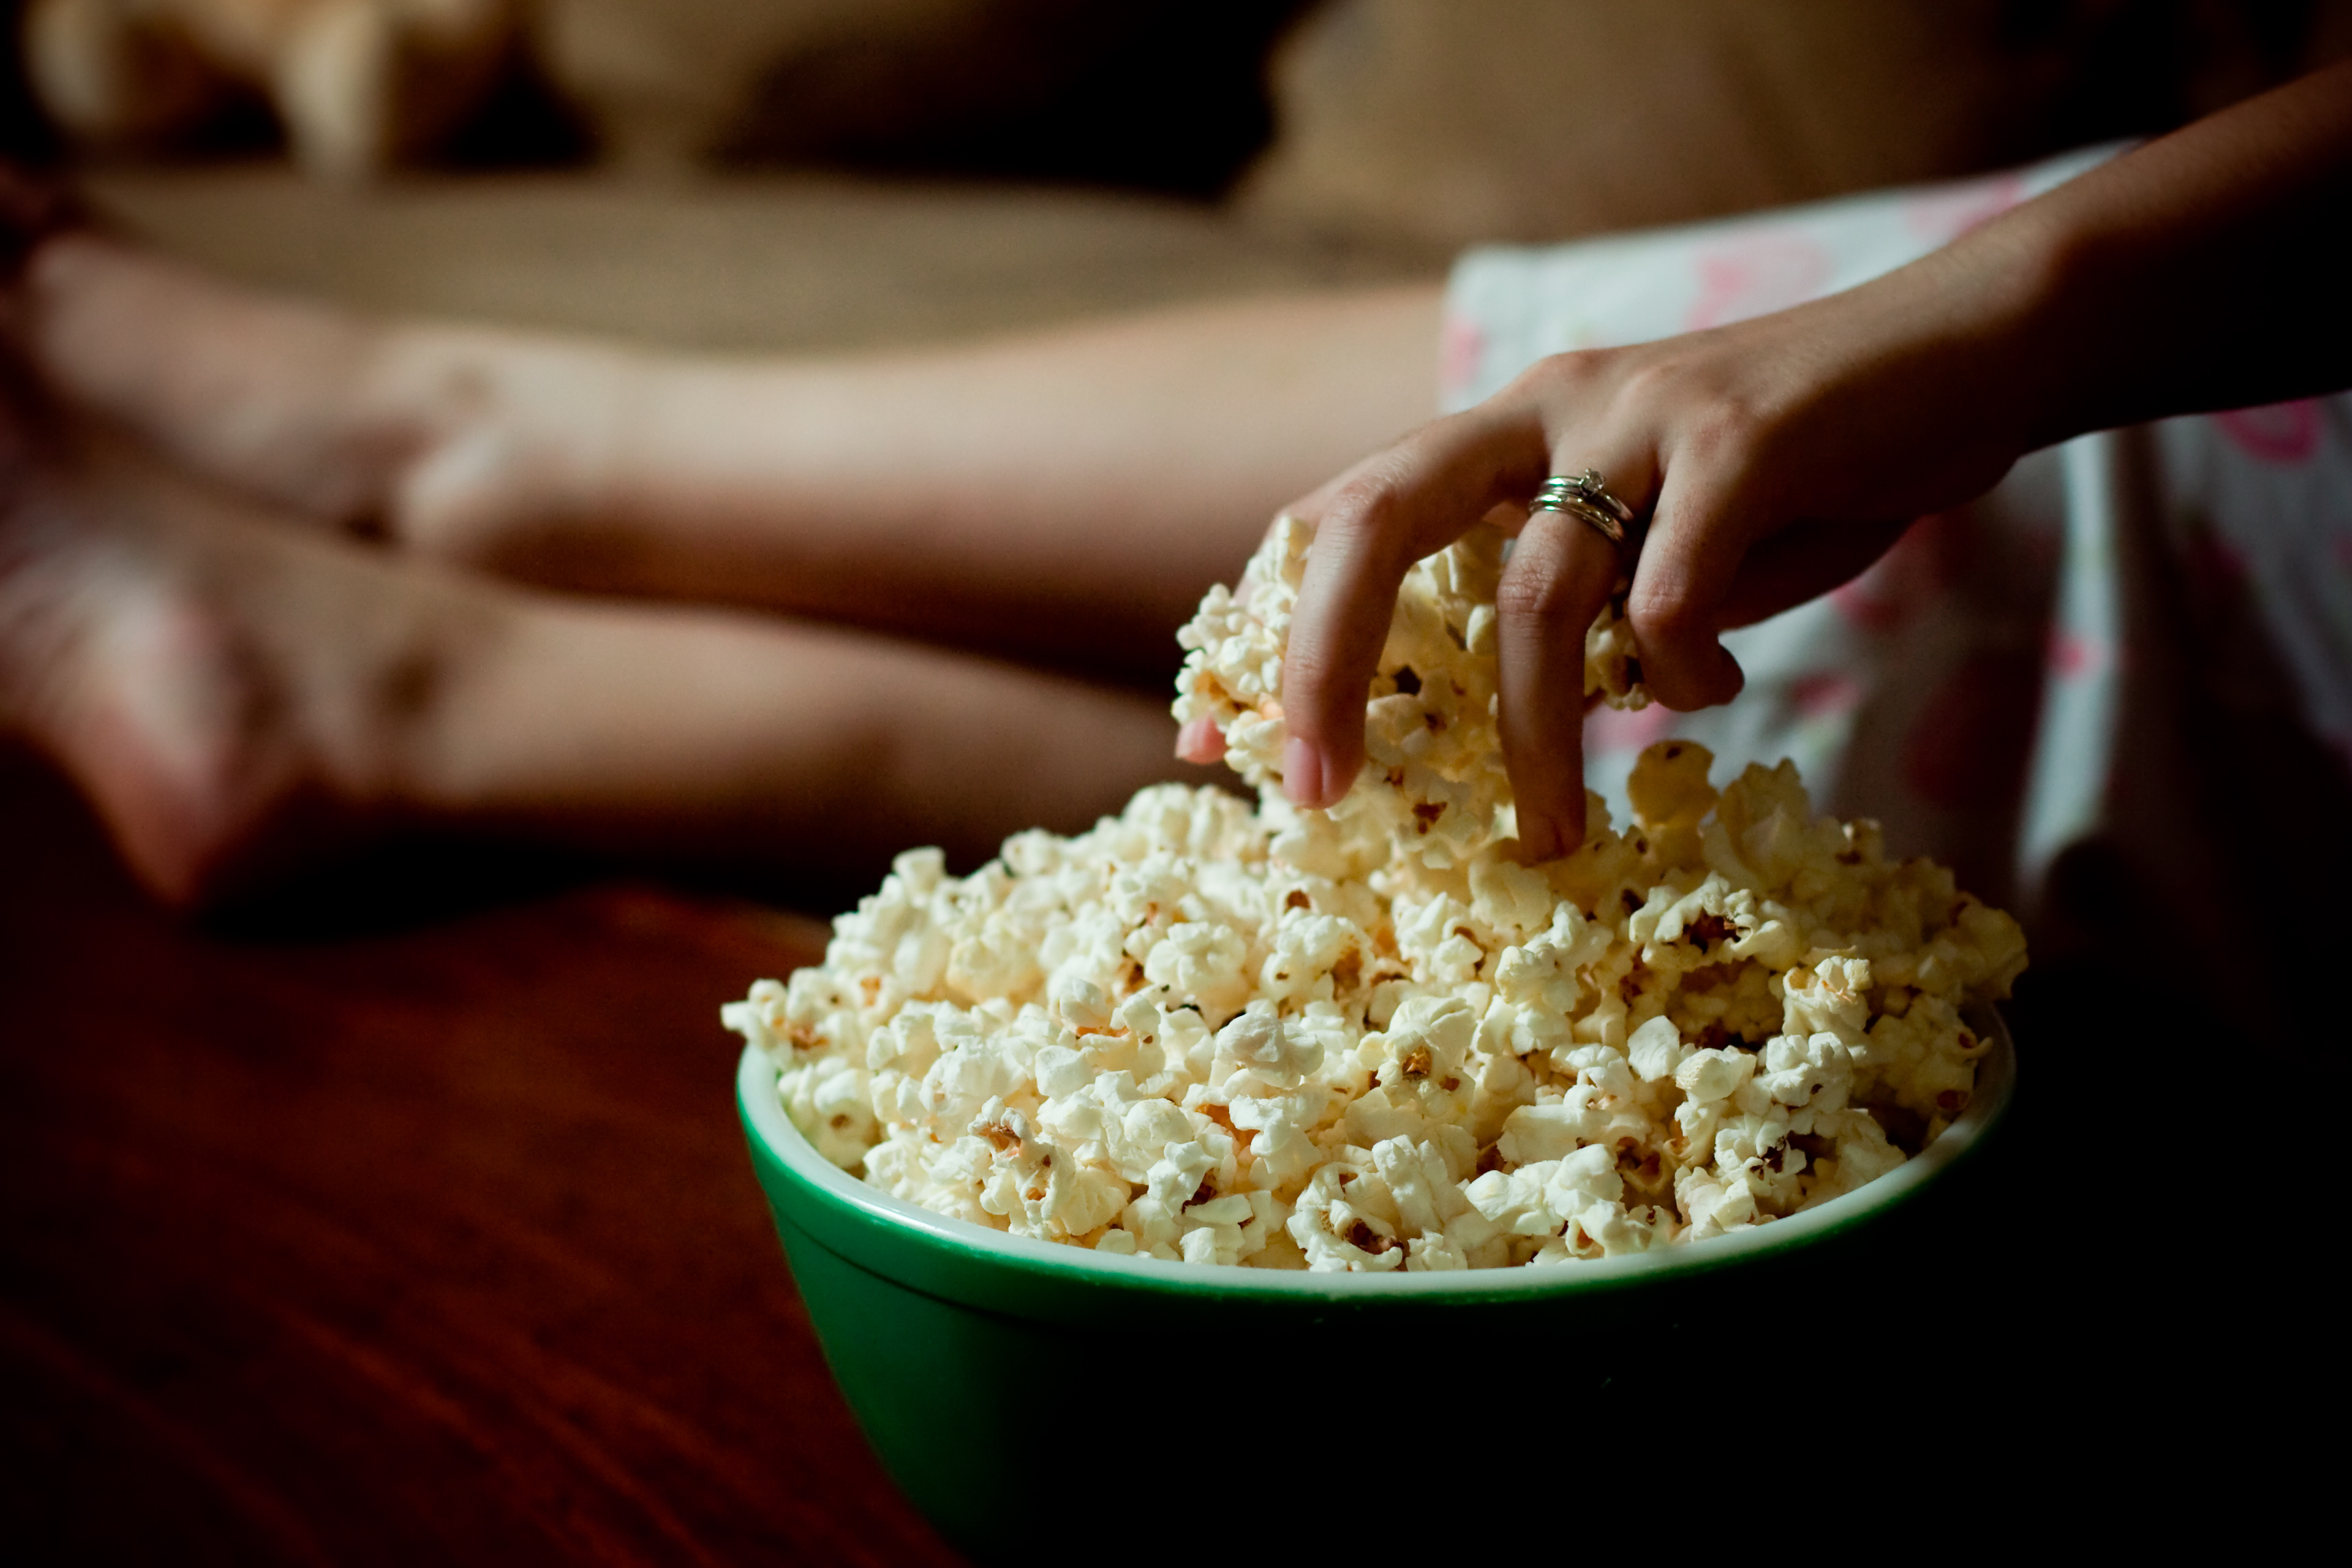 Woman with big thighs holding a larg bag of popcorn Stock Photo